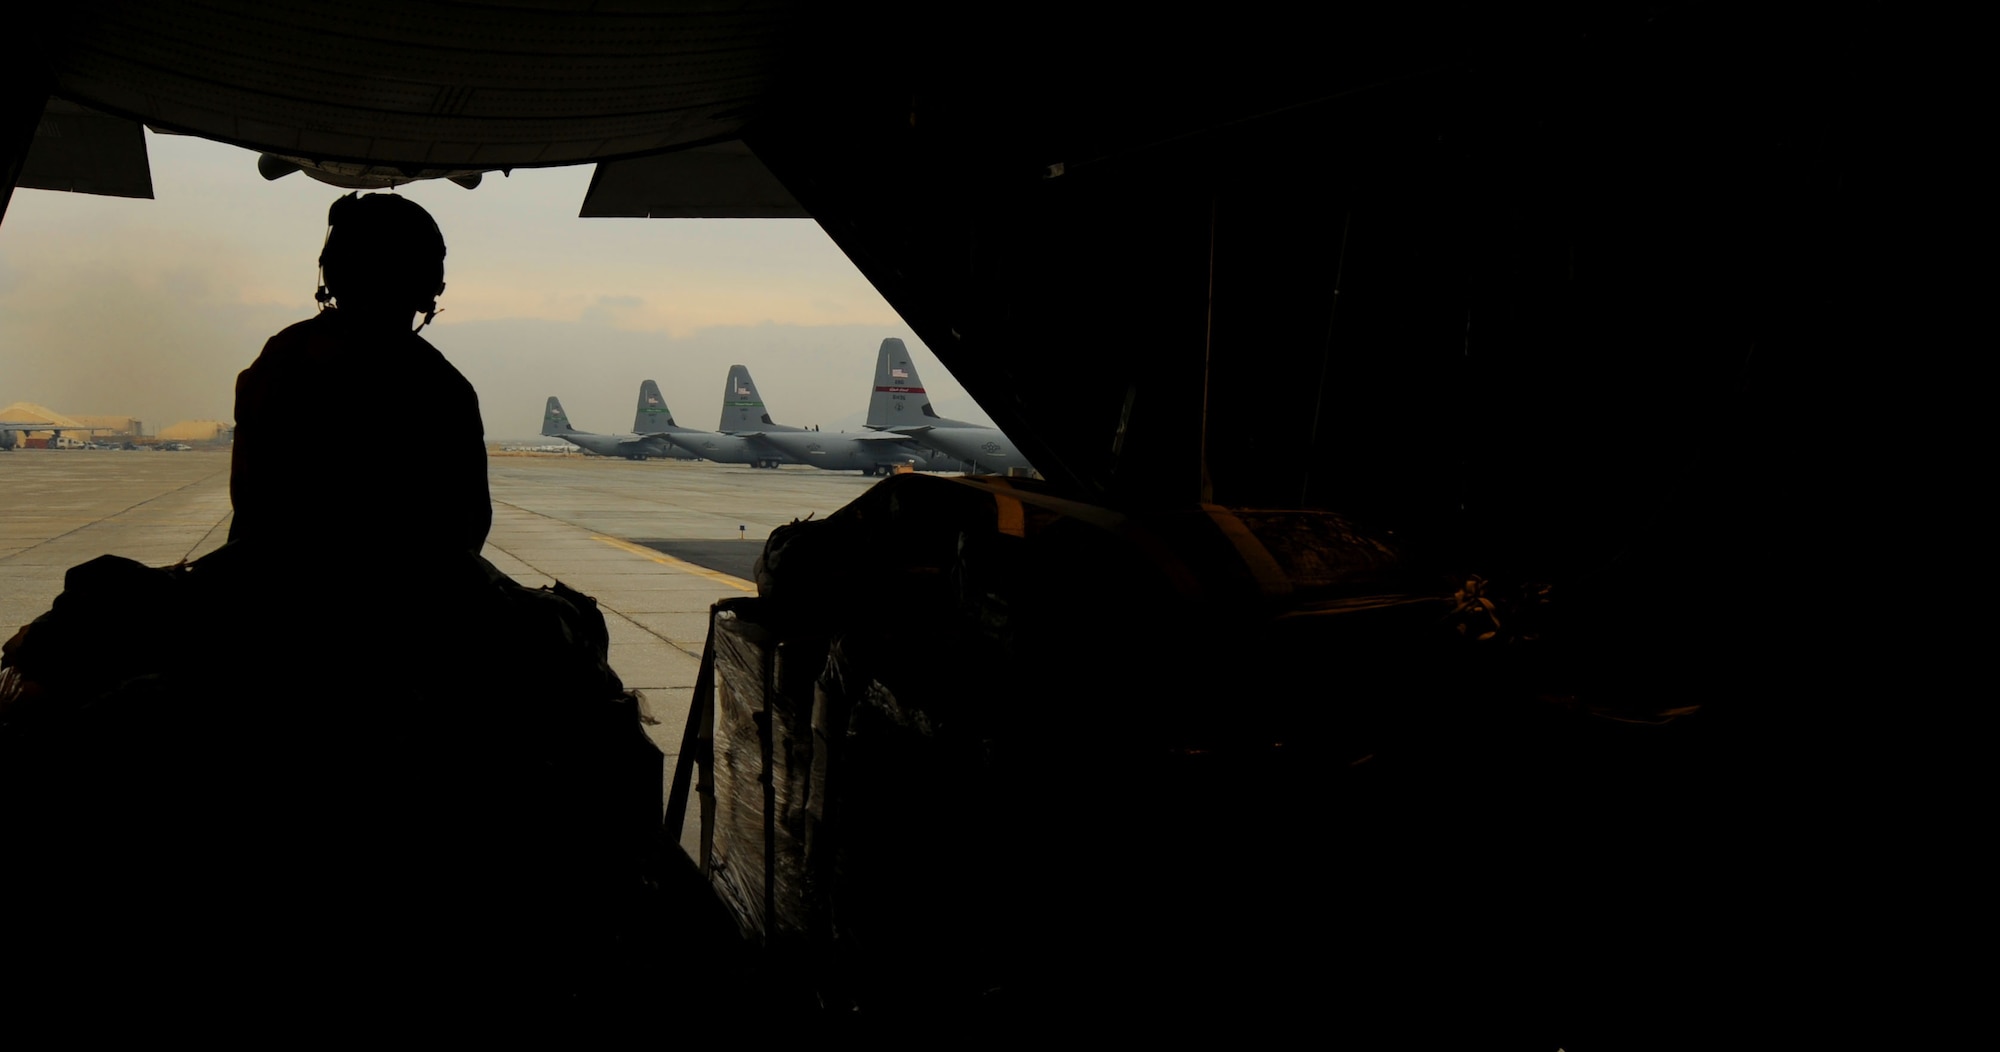 U.S. Air Force Airman 1st Class Kameron Trout, loadmaster, 774th Expeditionary Airlift Squadron, deployed to Bagram Airfield, Afghanistan, watches as a C-130H Hercules prepares to take off before airdropping  low-cost low-altitude re-supply bundles, Feb. 6, 2010. The mission marked the first time an Air Force C-130 crew airdropped LCLA bundles in a combat zone.  (U.S. Air Force photo/Staff Sgt. Angelita Lawrence/released)
